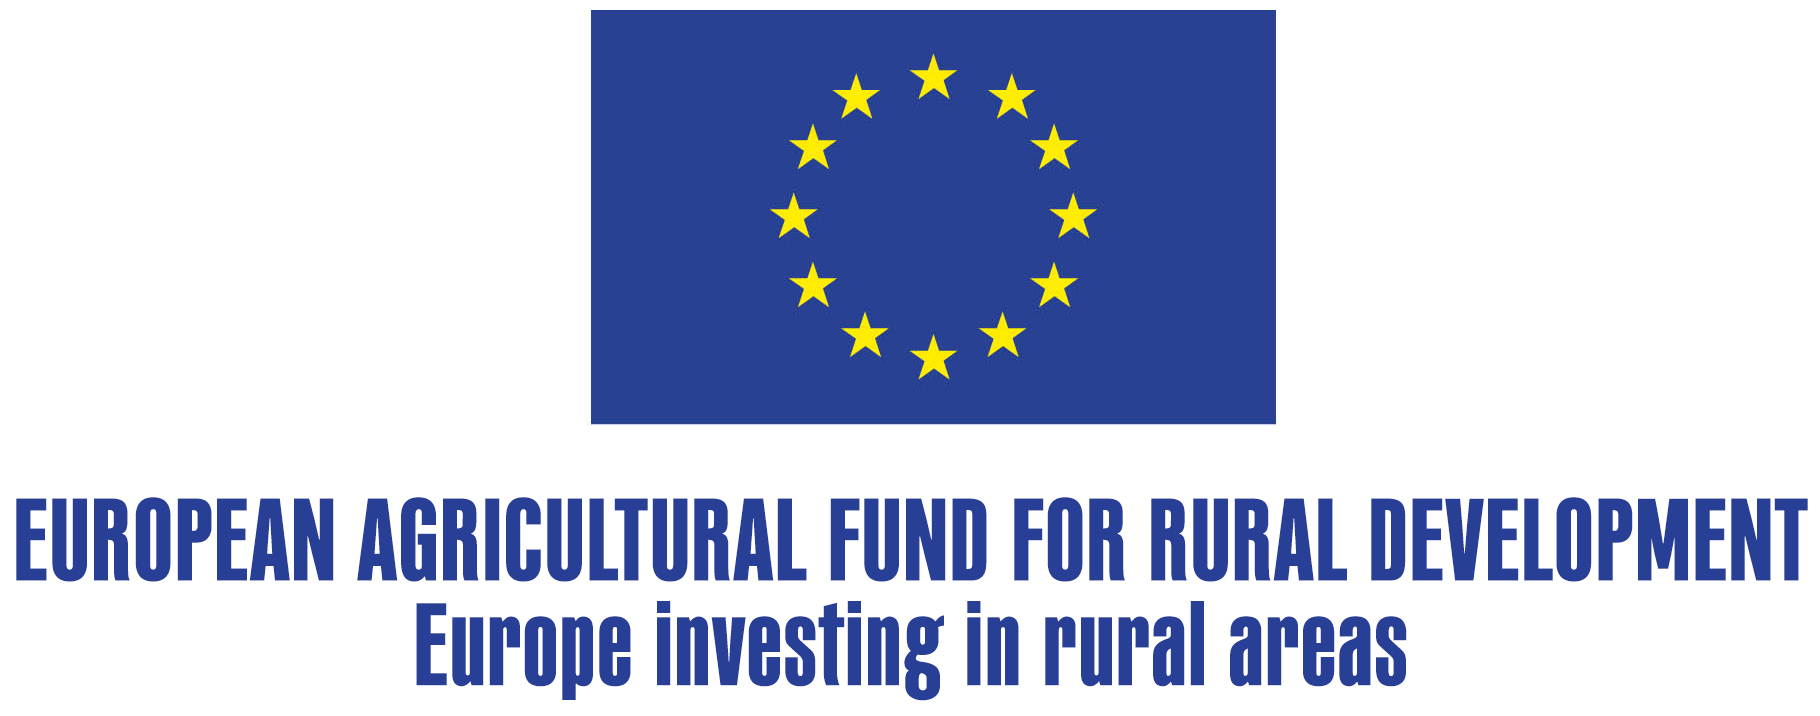 AGRICULTURAL FUND